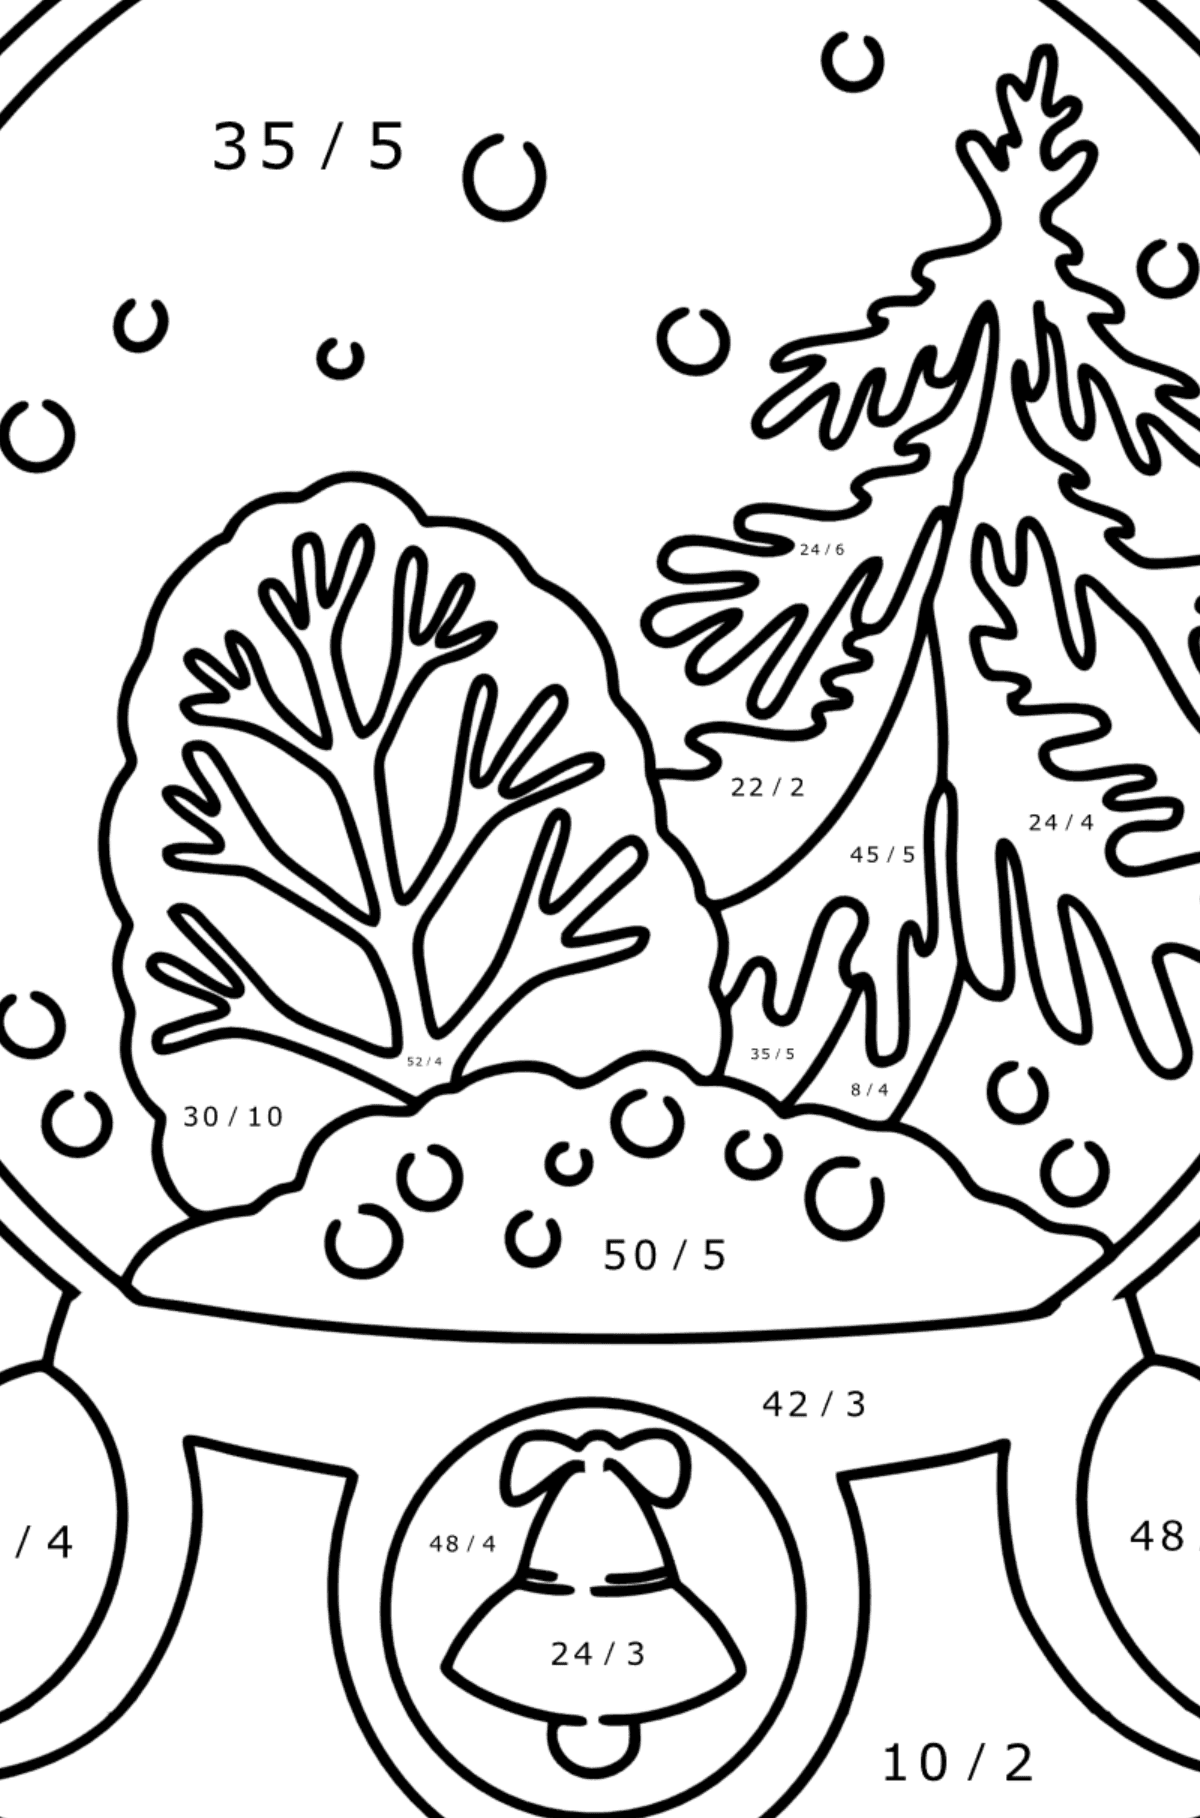 Snow Globe coloring page - Math Coloring - Division for Kids